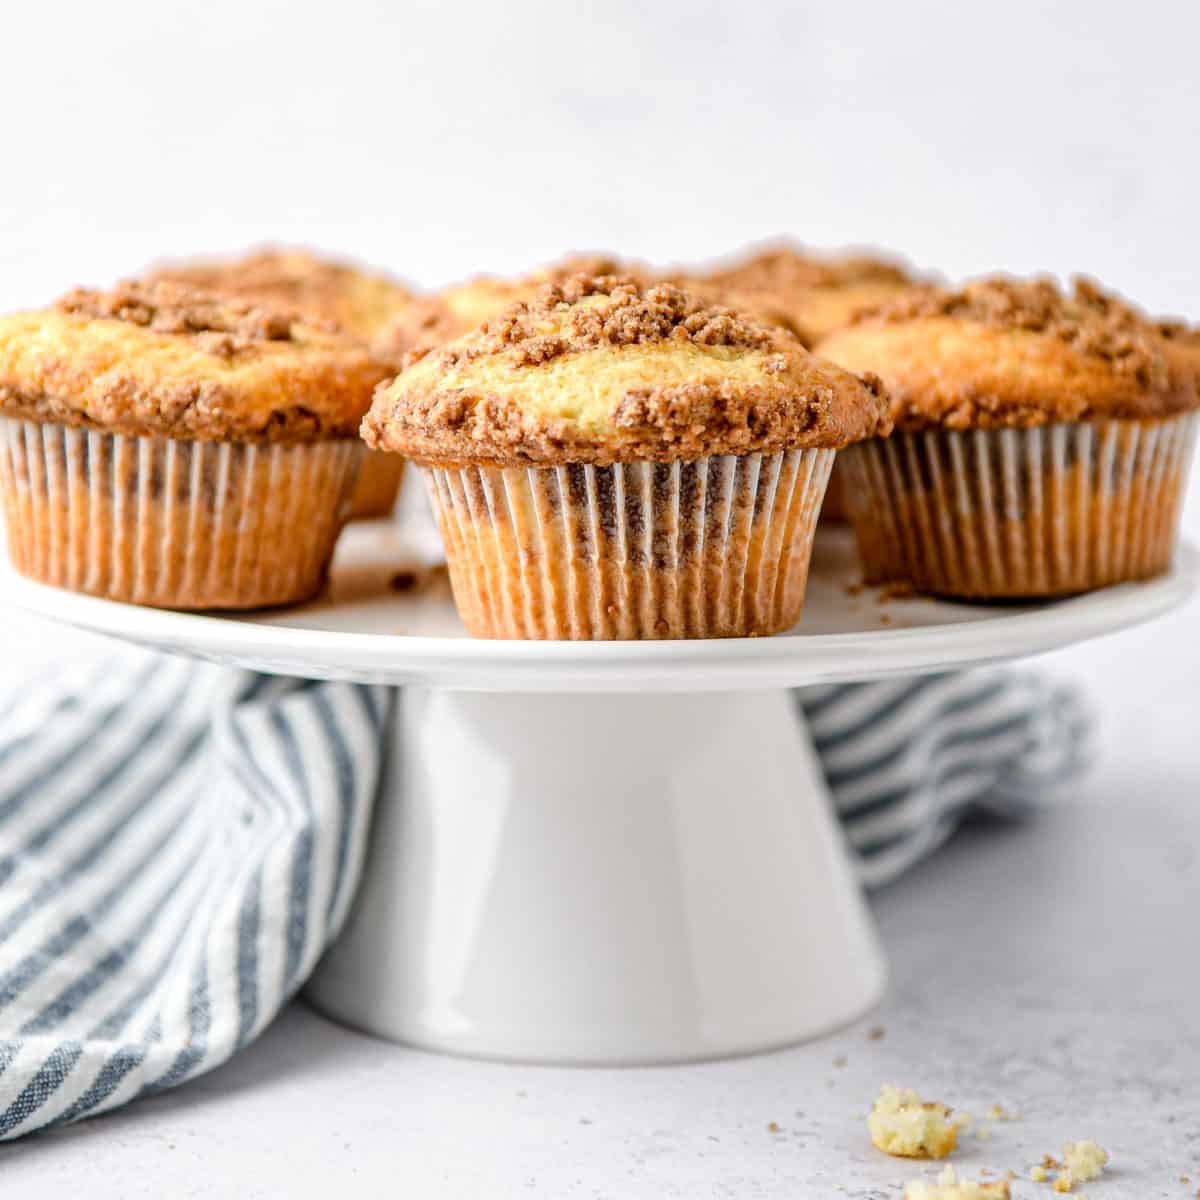 Cinnamon streusel muffins on a stand.